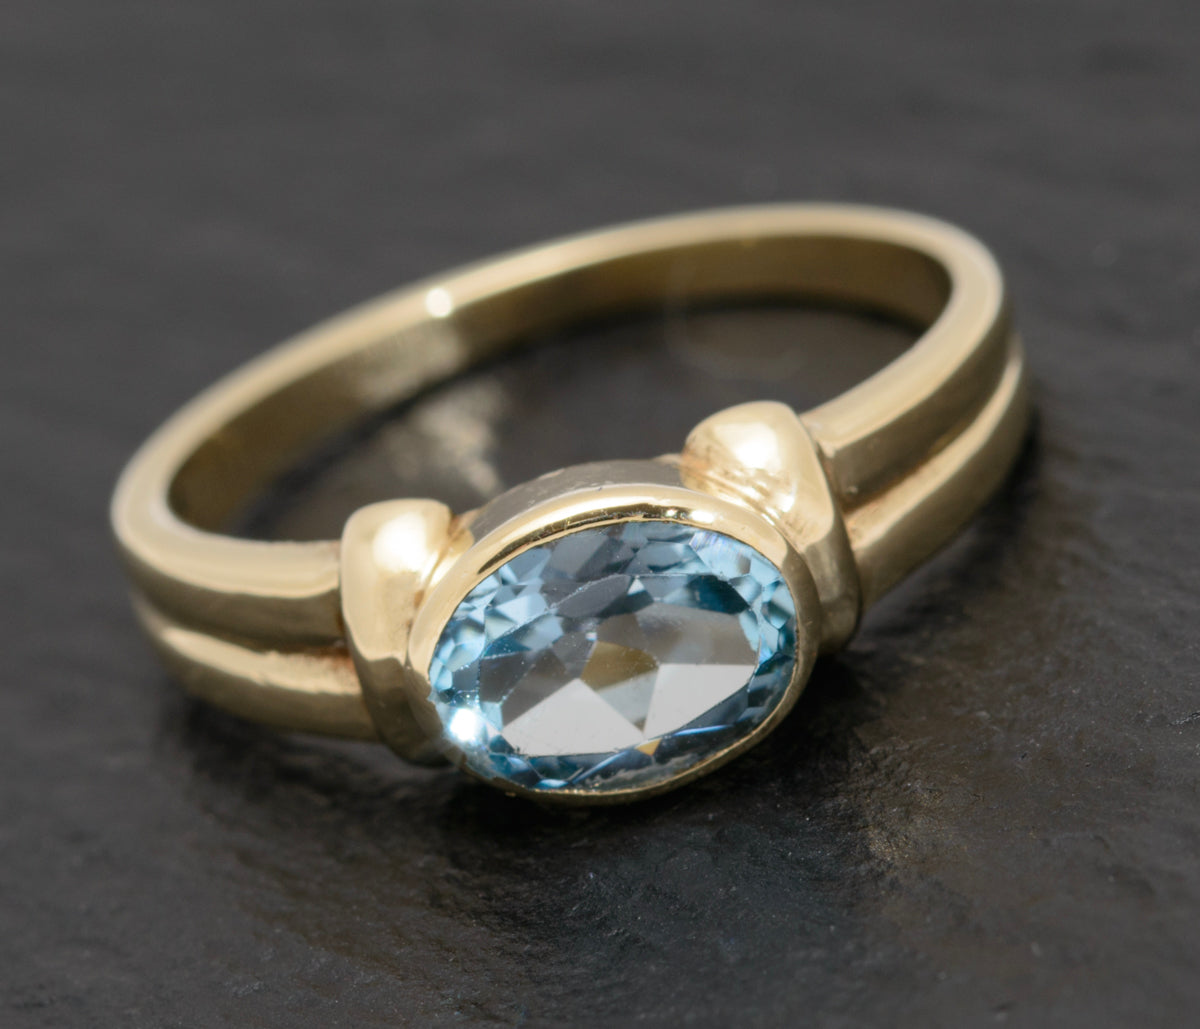 9ct Gold Ring With Natural Blue Topaz Gemstone Oval Facet Cut Design (A1631)